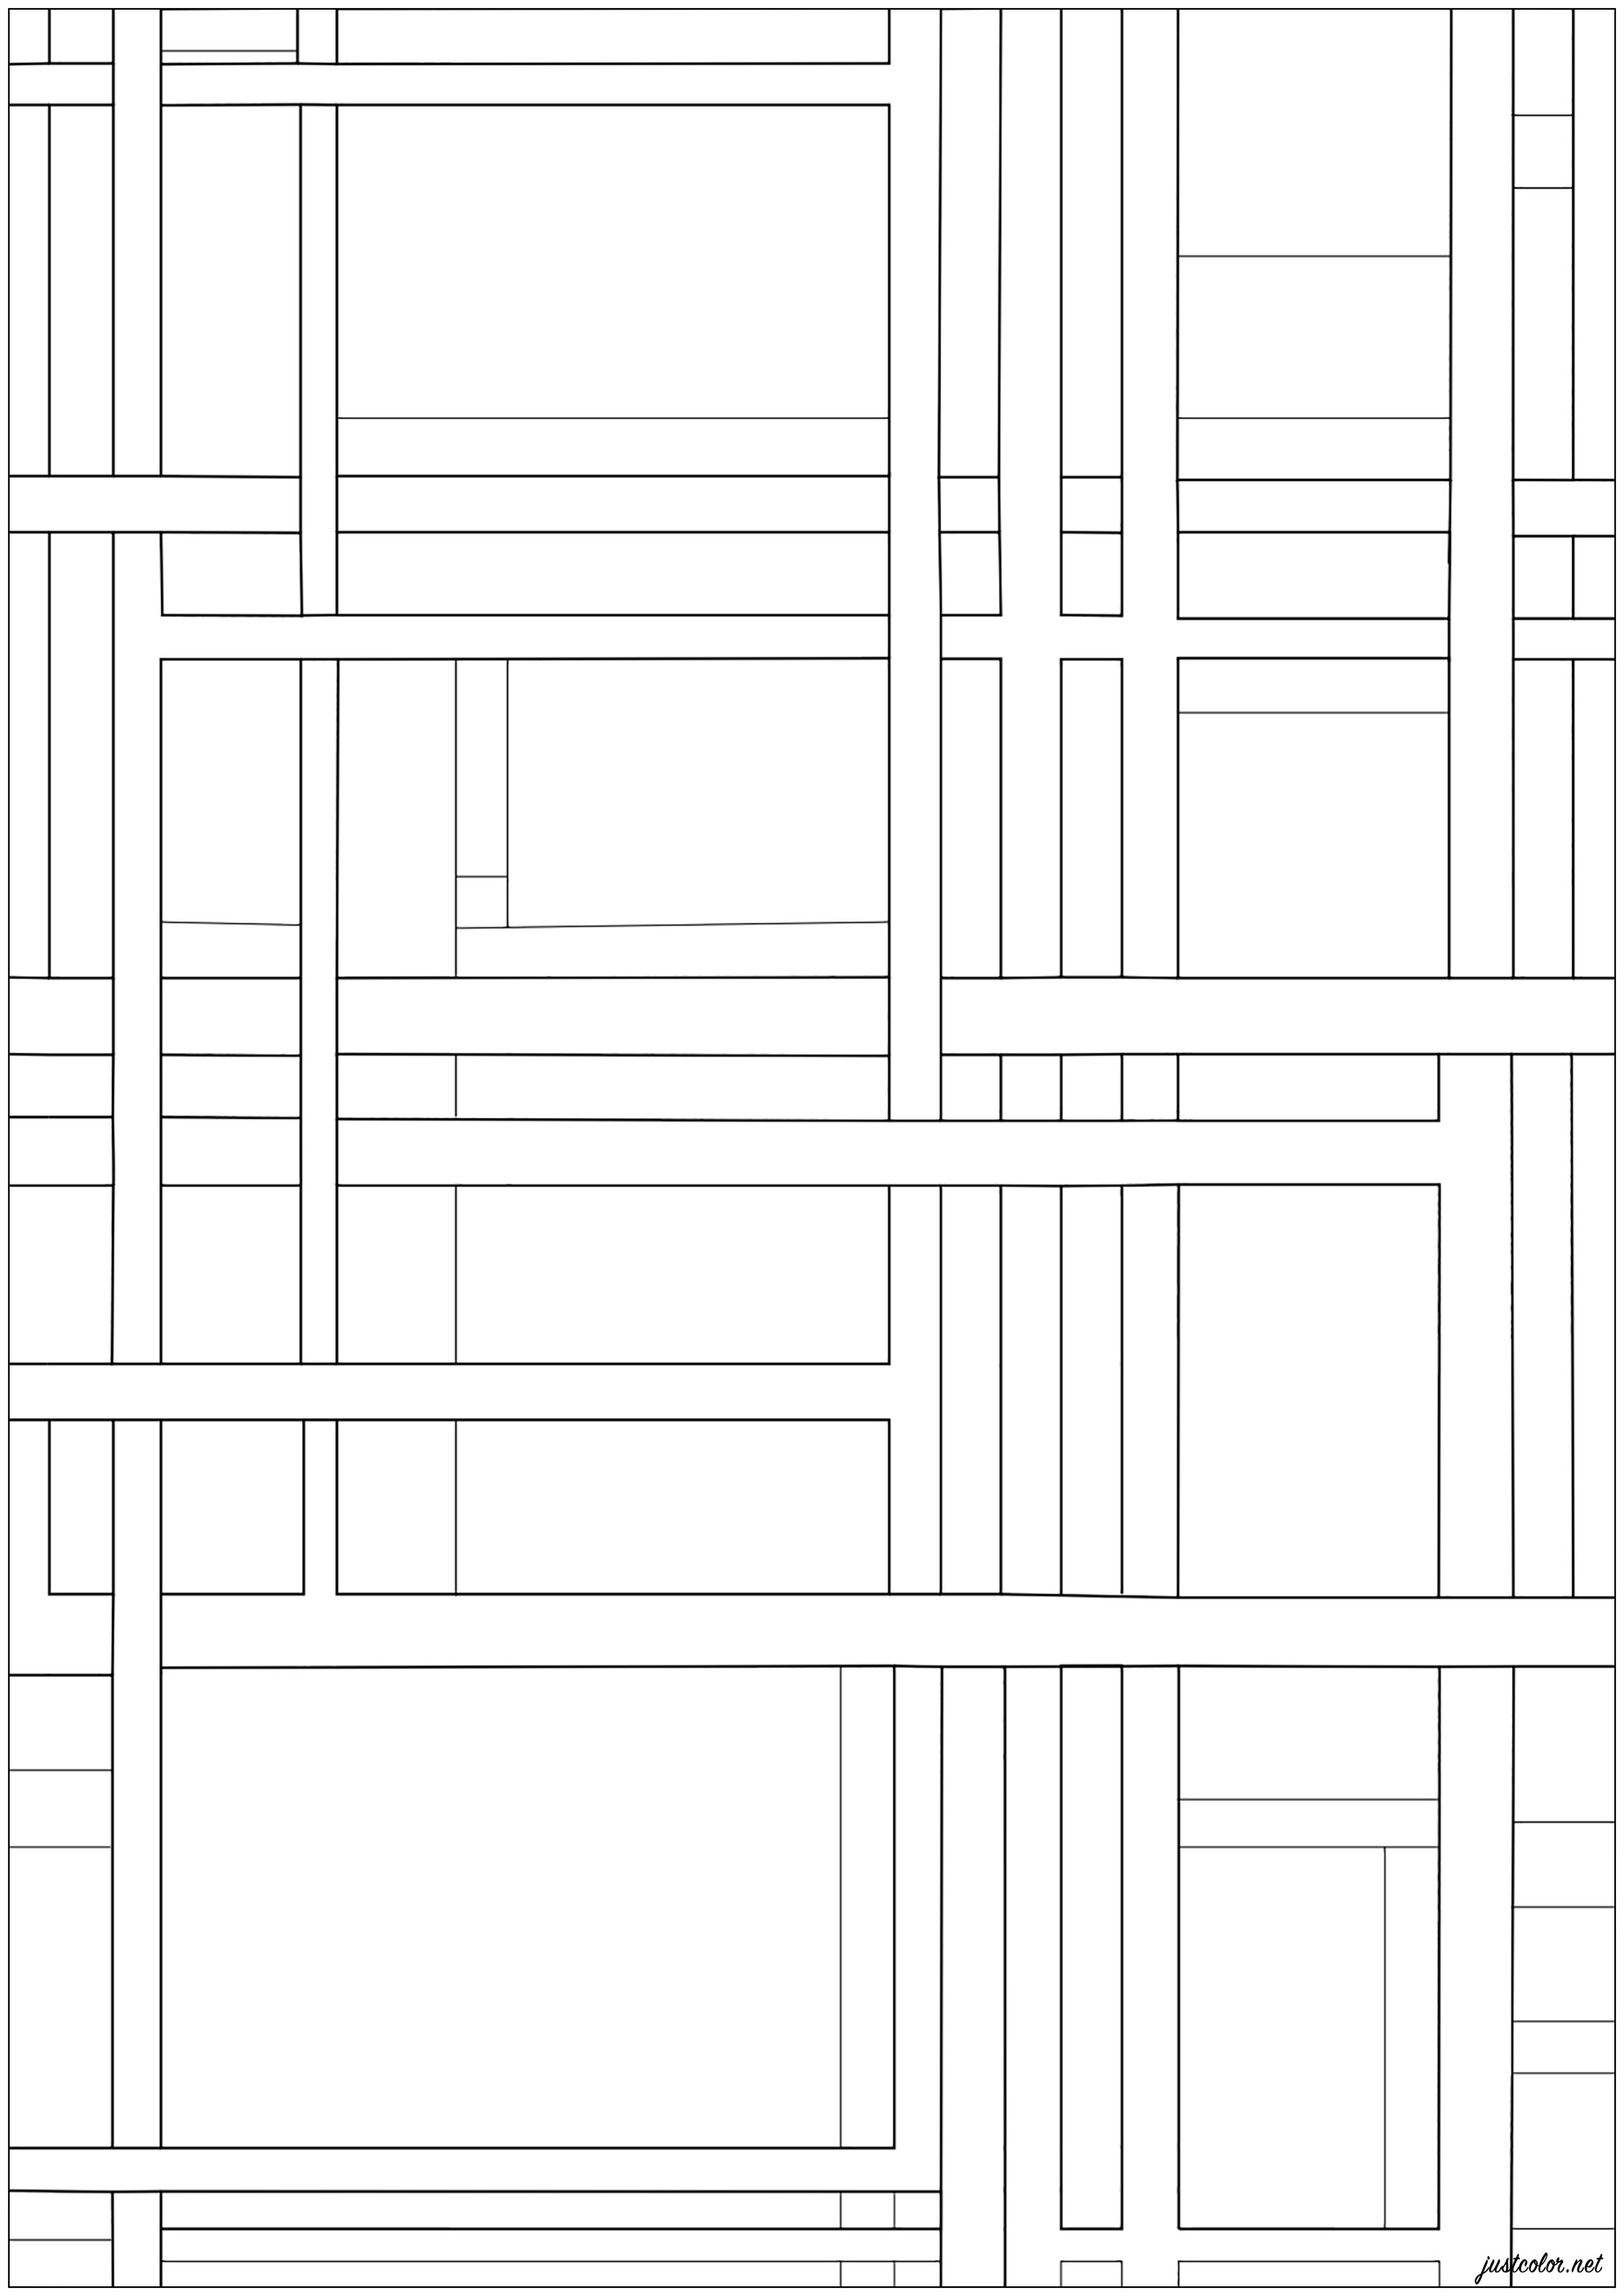 Coloring page created from Ilya Bolotowsky's painting 'City Rectangle' (1948). The orderly, grid-based composition of the paintings of this artist is marked by black and white lines of various widths and rectangular areas of unmodulated primary colors. Like Mondrian, Bolotowsky strove to establish a balance of horizontals and verticals that would be at once harmonious and dynamic.